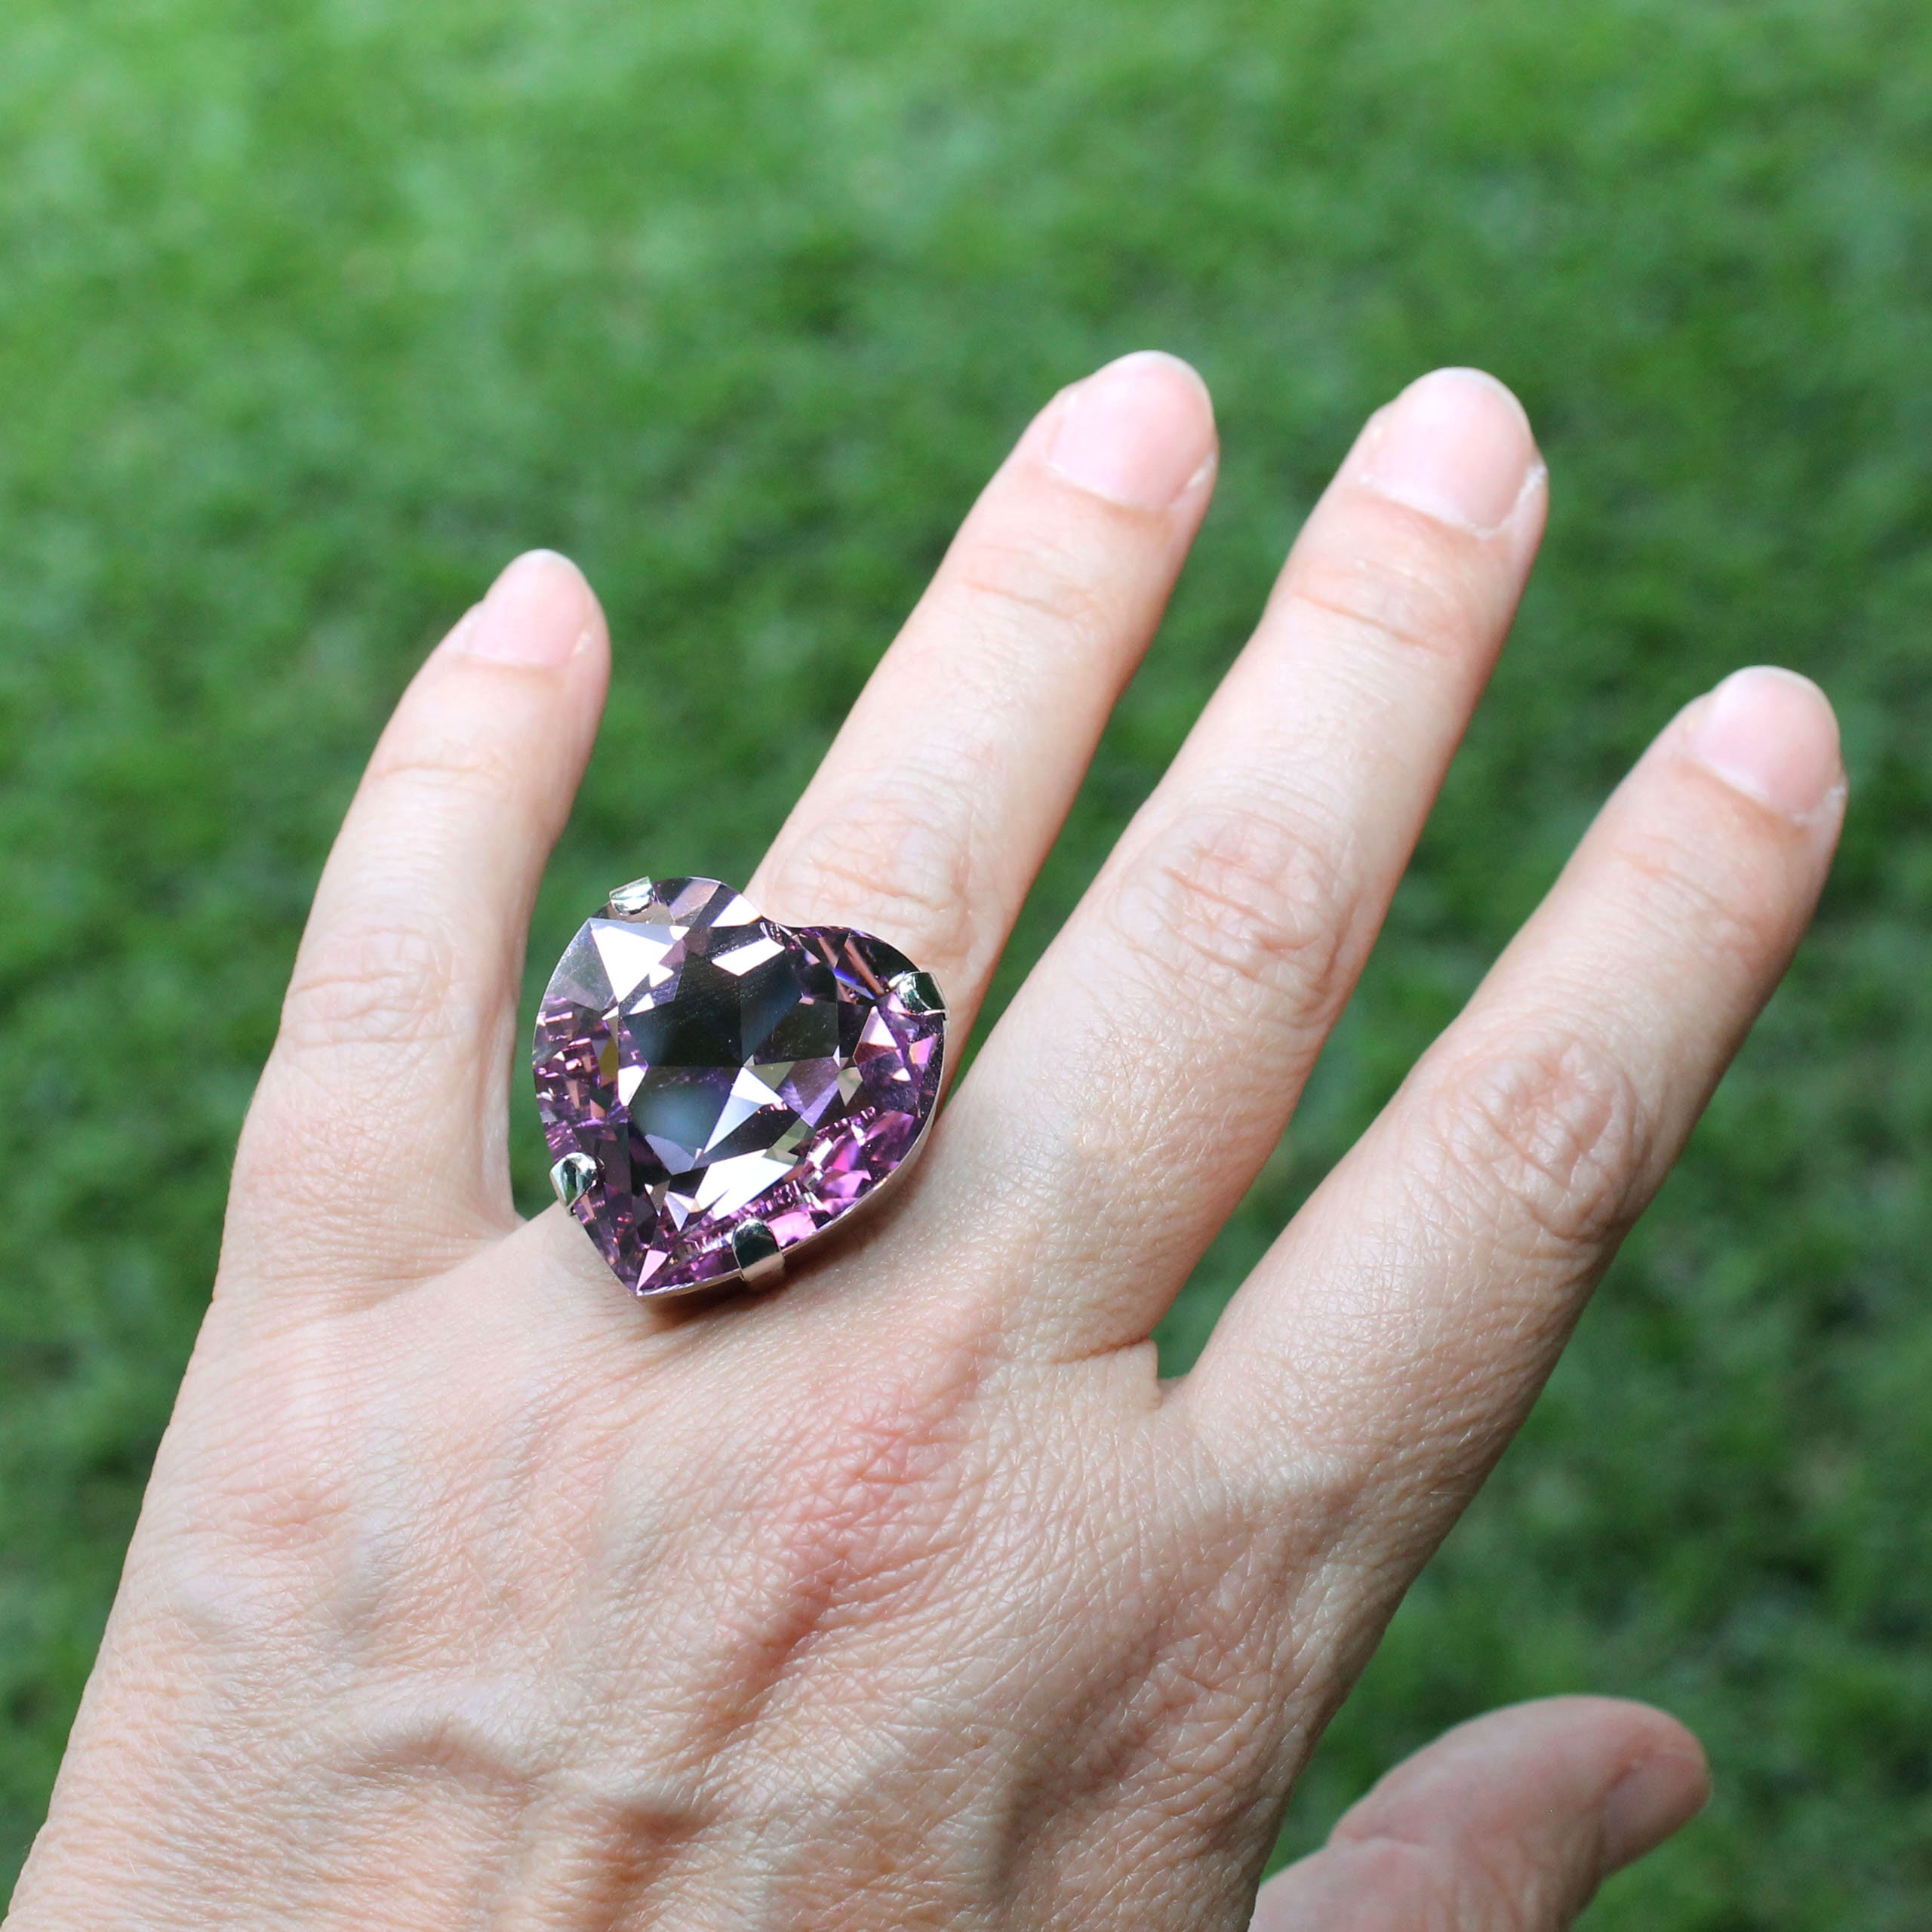 Pink Heart Ring, Large Heart Shaped Crystal Ring, Wedding Ring, Cocktail Ring, Statement Rings, Promise Ring, Heart Stone Ring, Gift, GR73